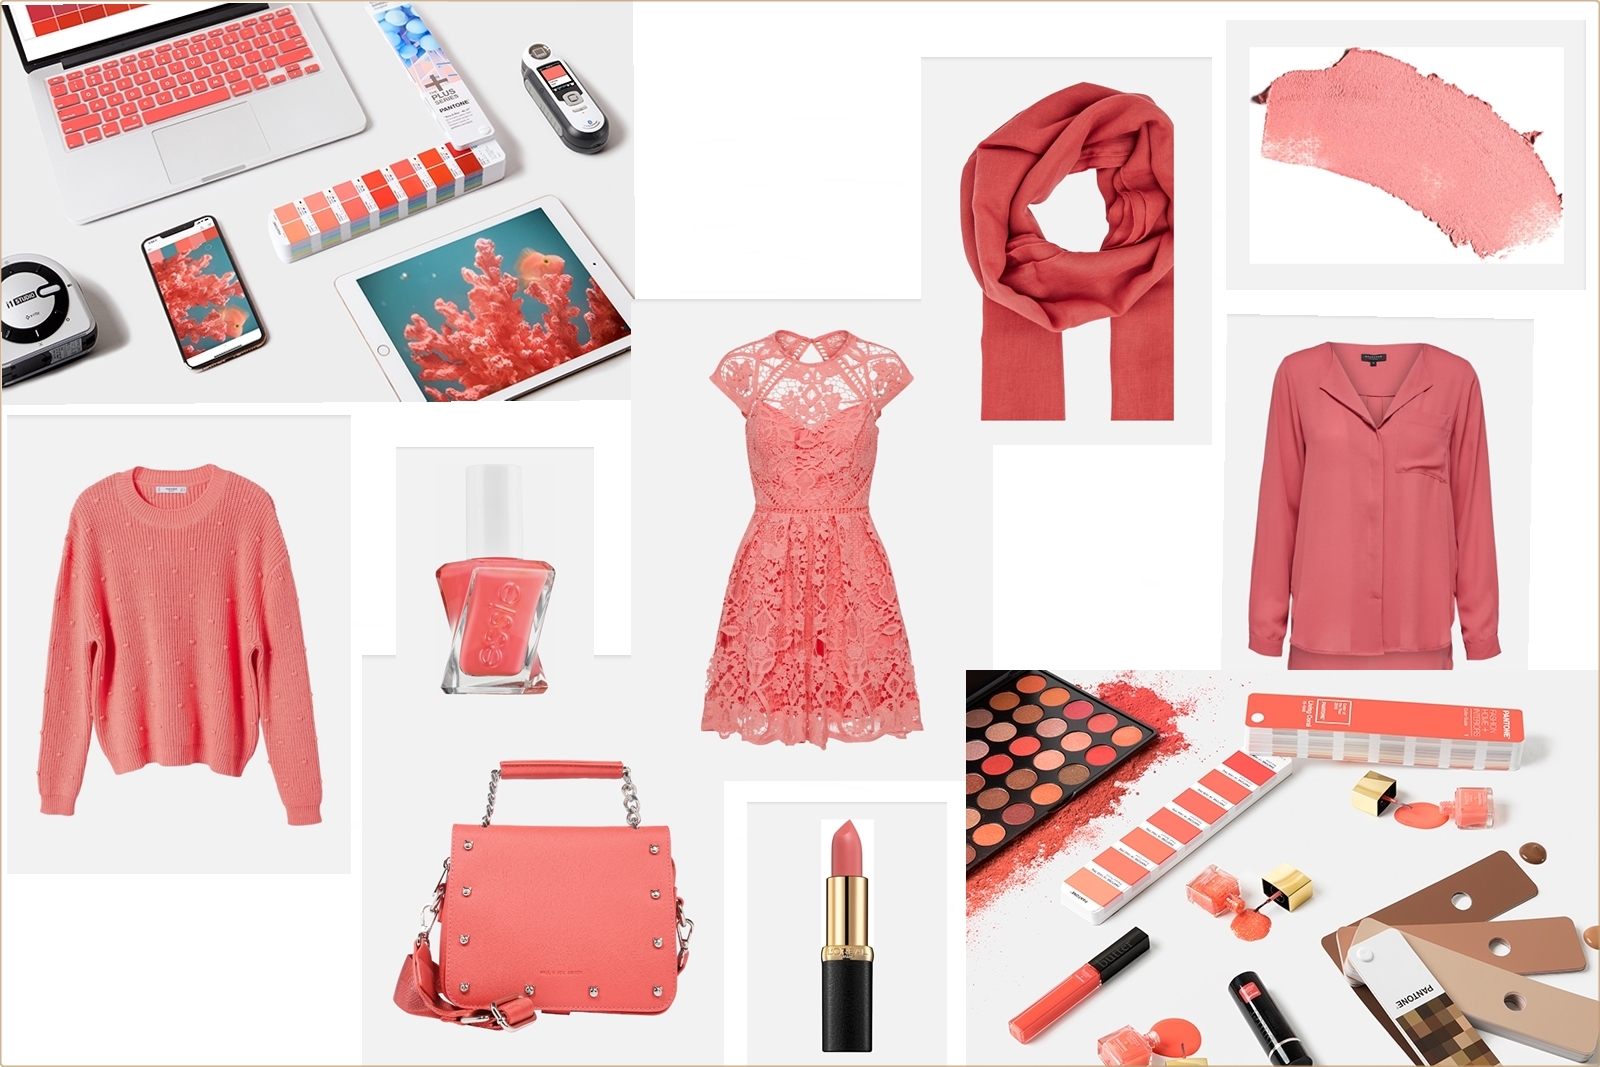 Die Trendfarbe des Jahres 2019 - Living Coral - Pantone Farbe des Jahres - Farbtrend in der Mode und im Bereich Beauty - Fashionladyloves by Tamara Wagner